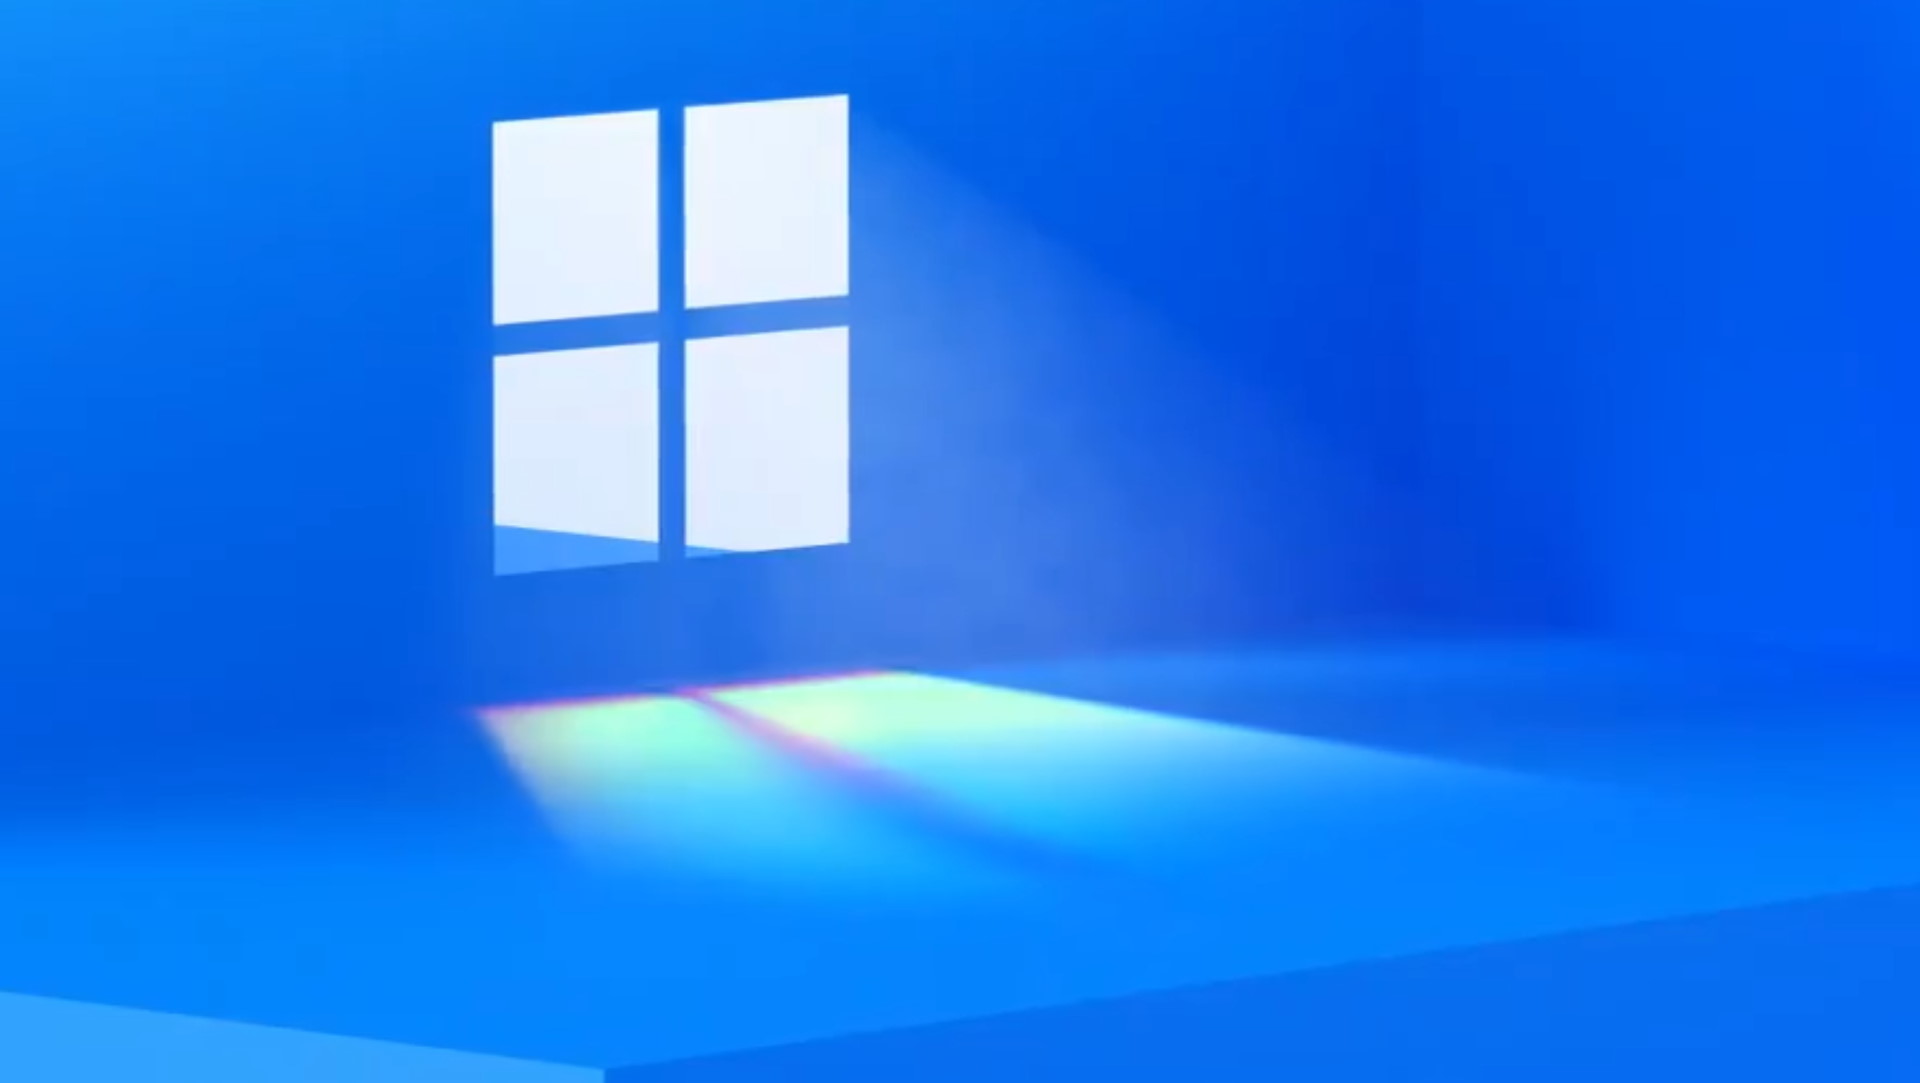 Leaked Windows 11 screenshots apparently confirmed to be